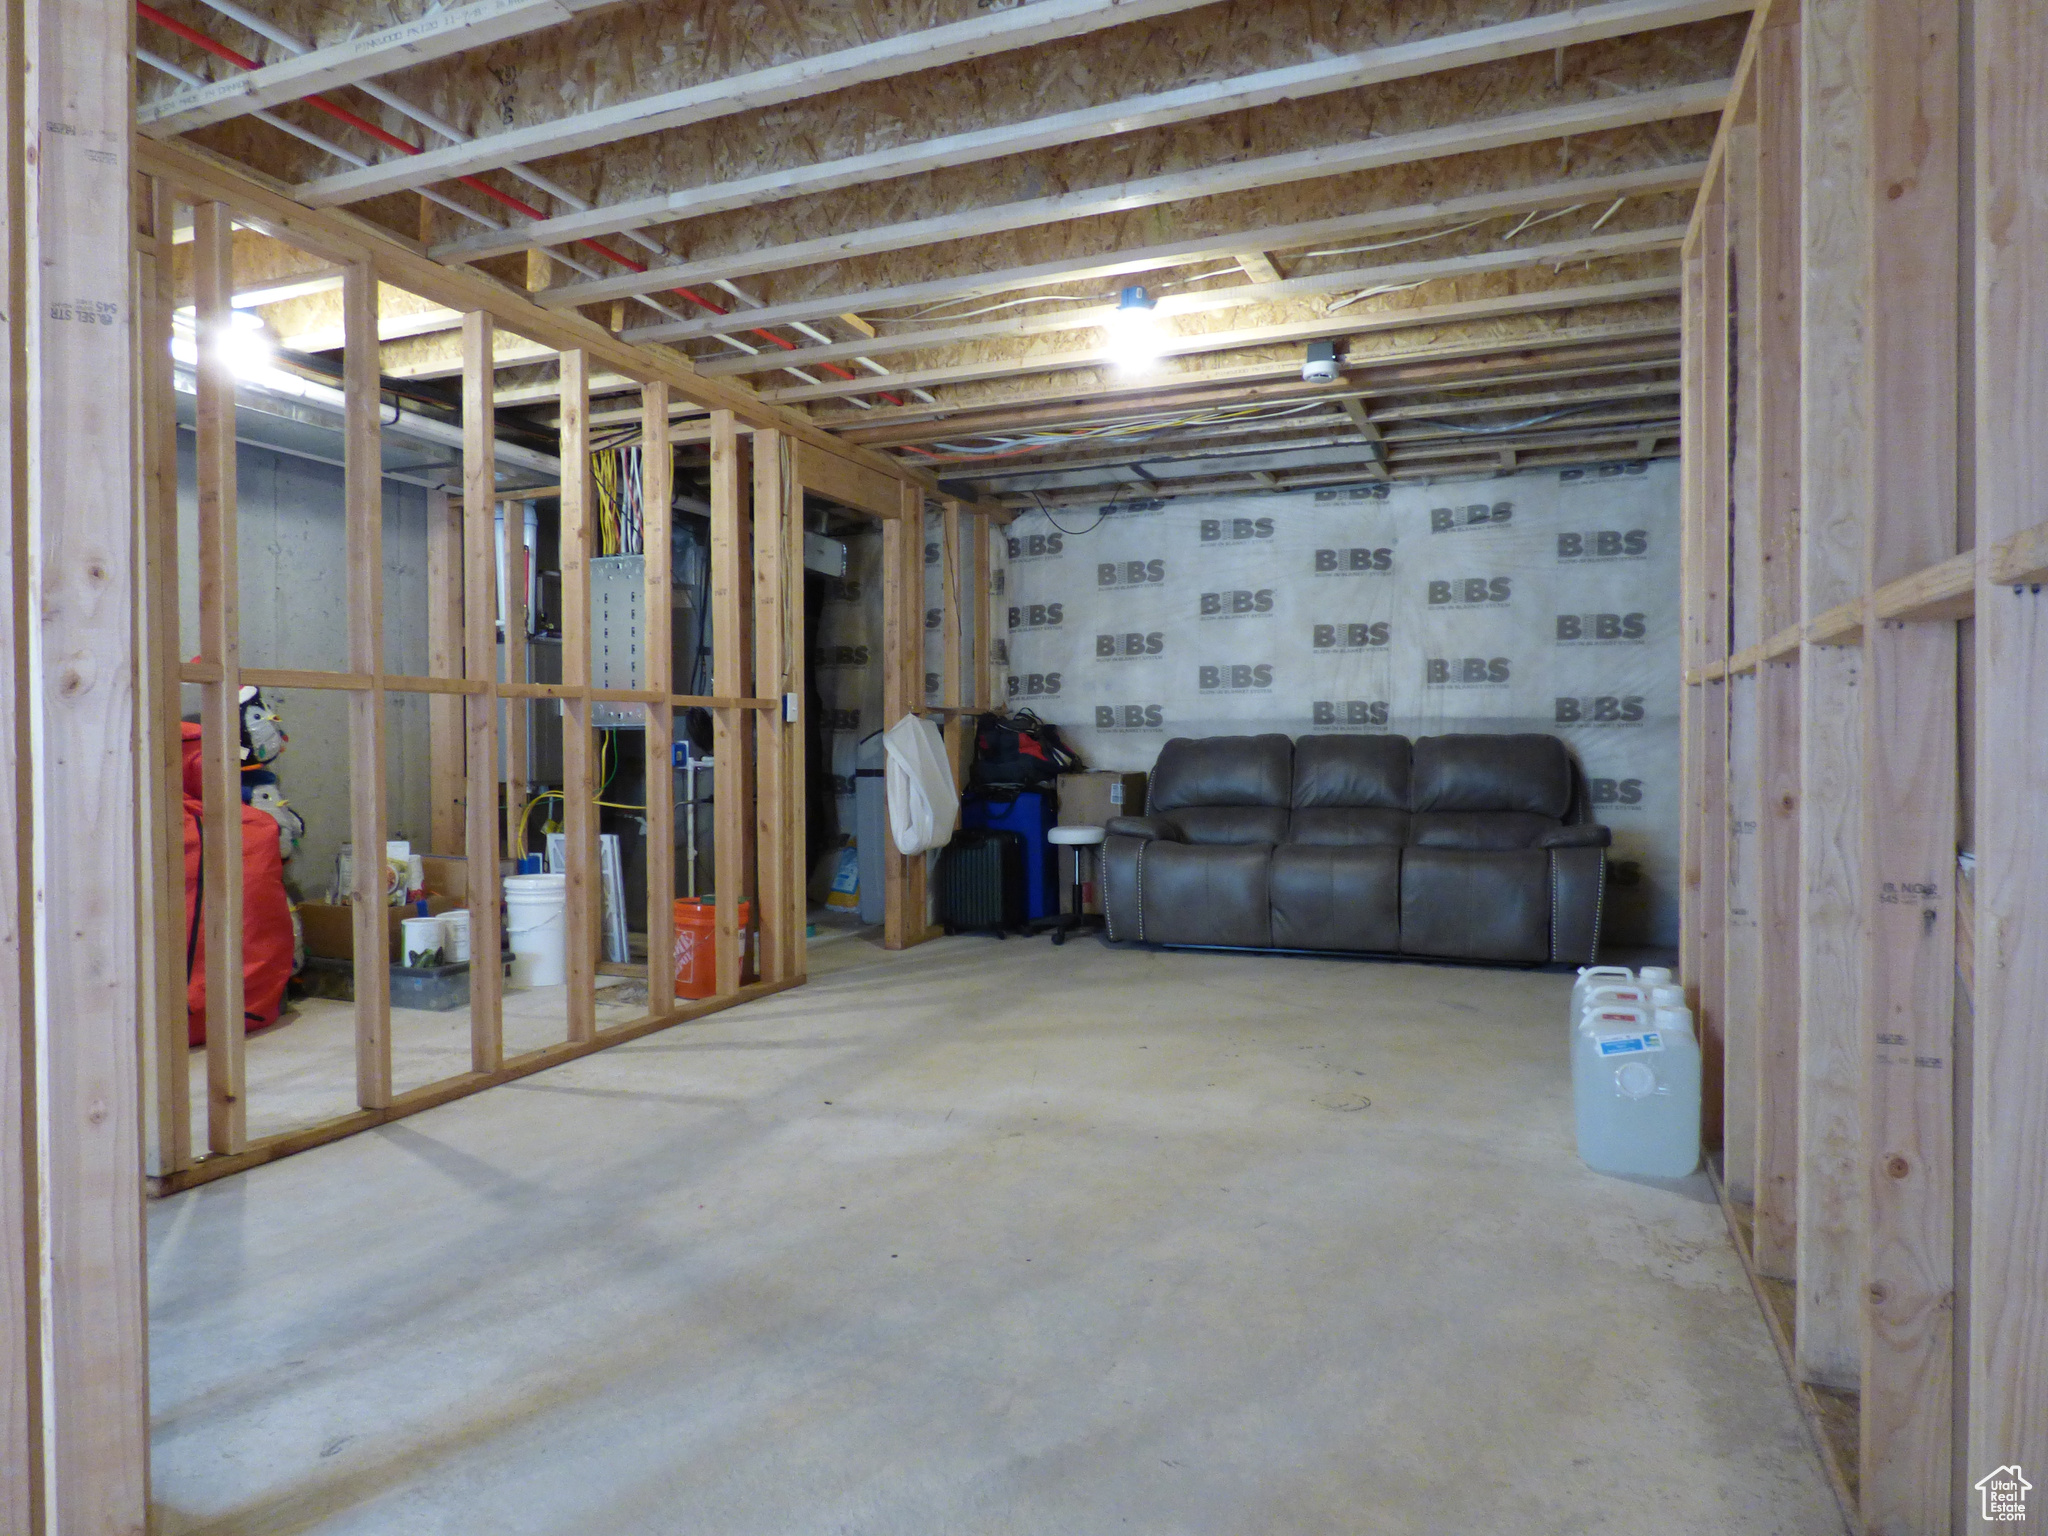 Basement unfinished family room/great room